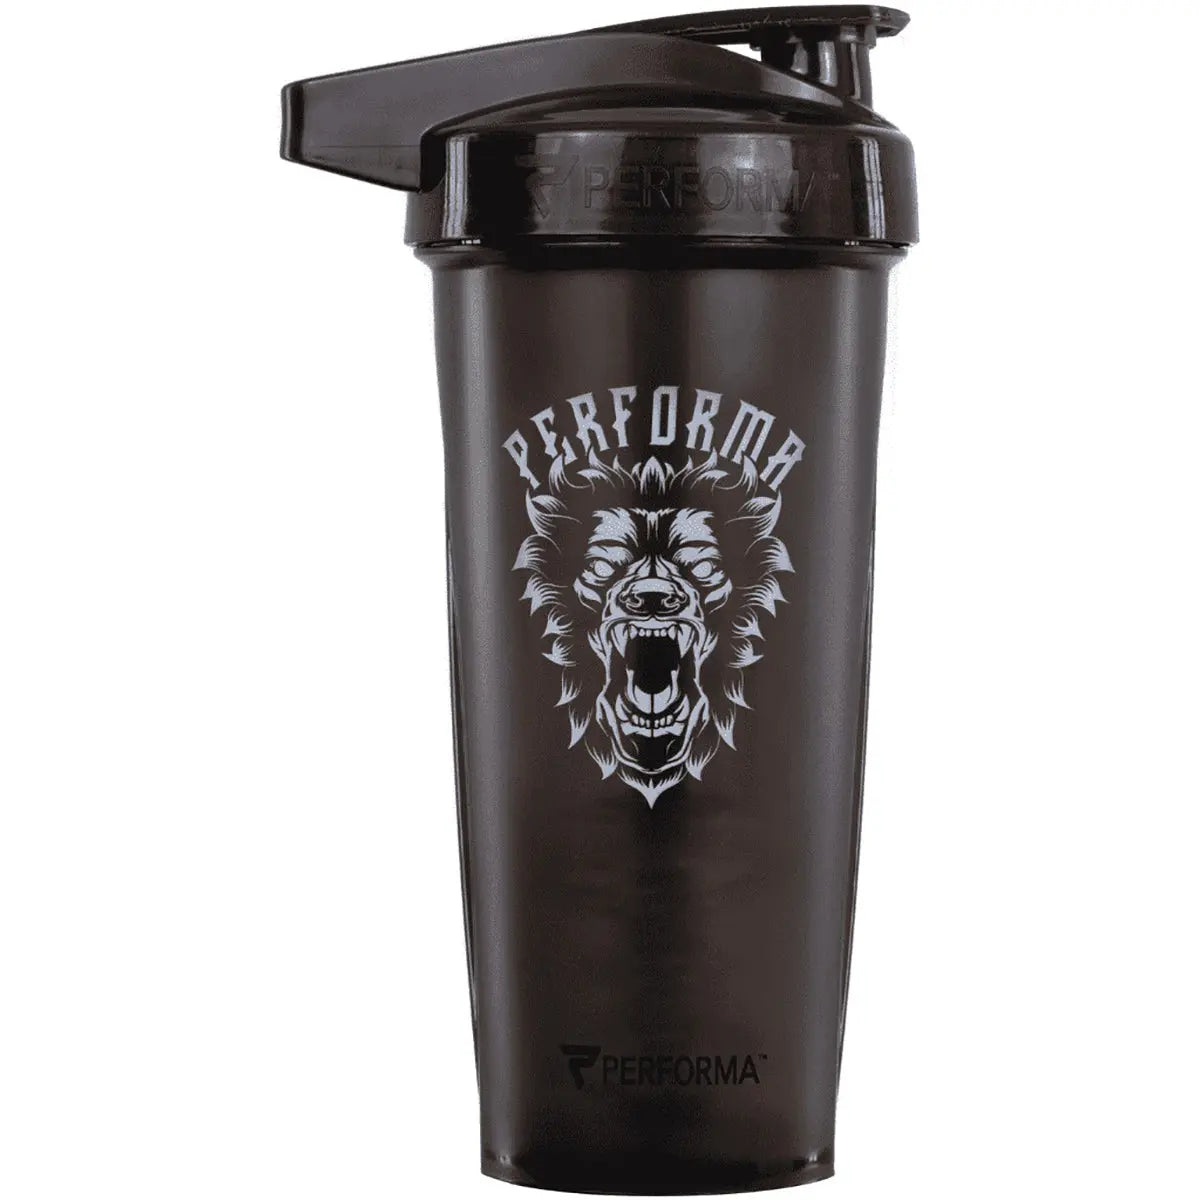 Performa Activ 28 oz. Shaker Cup Gym Bottle - Beastmode Performa